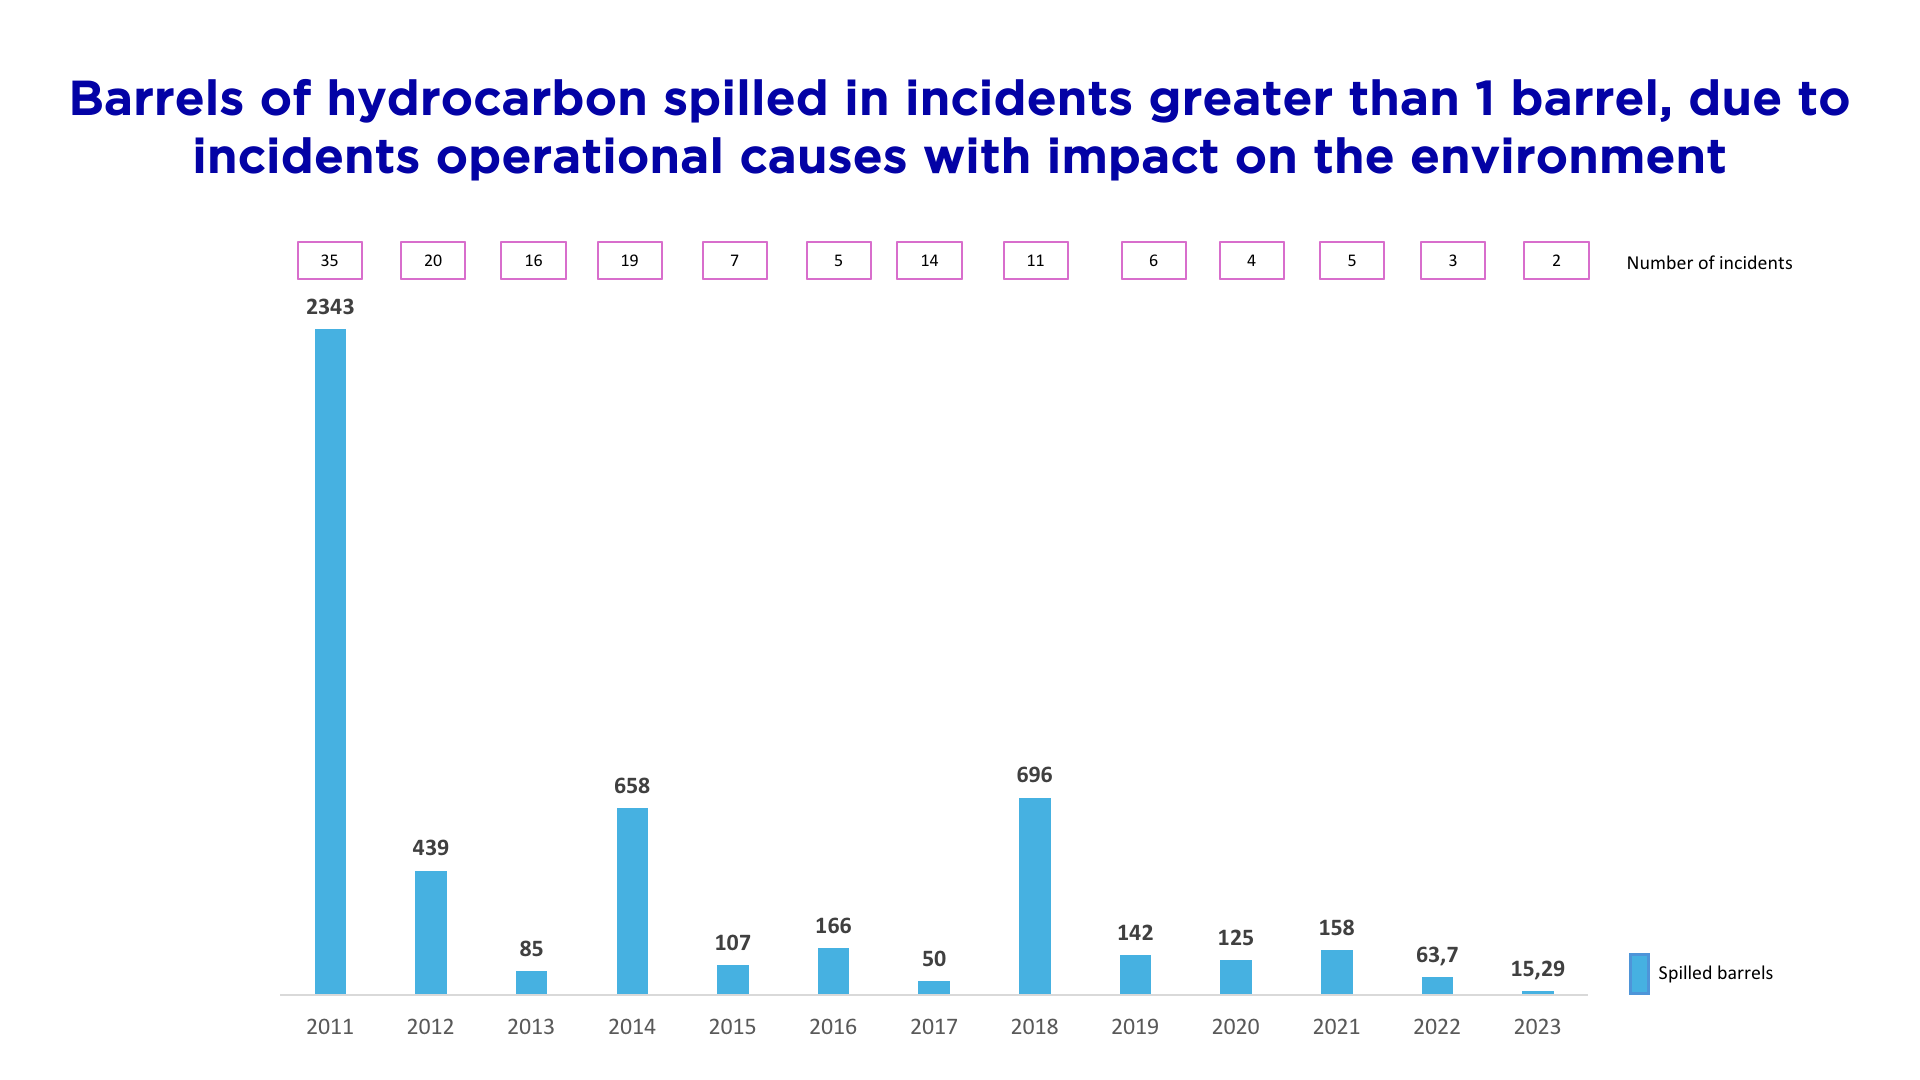 Barrels of hydrocarbon spilled by incidents due to operational causes greater than 1 barrel with possible impact on the environment